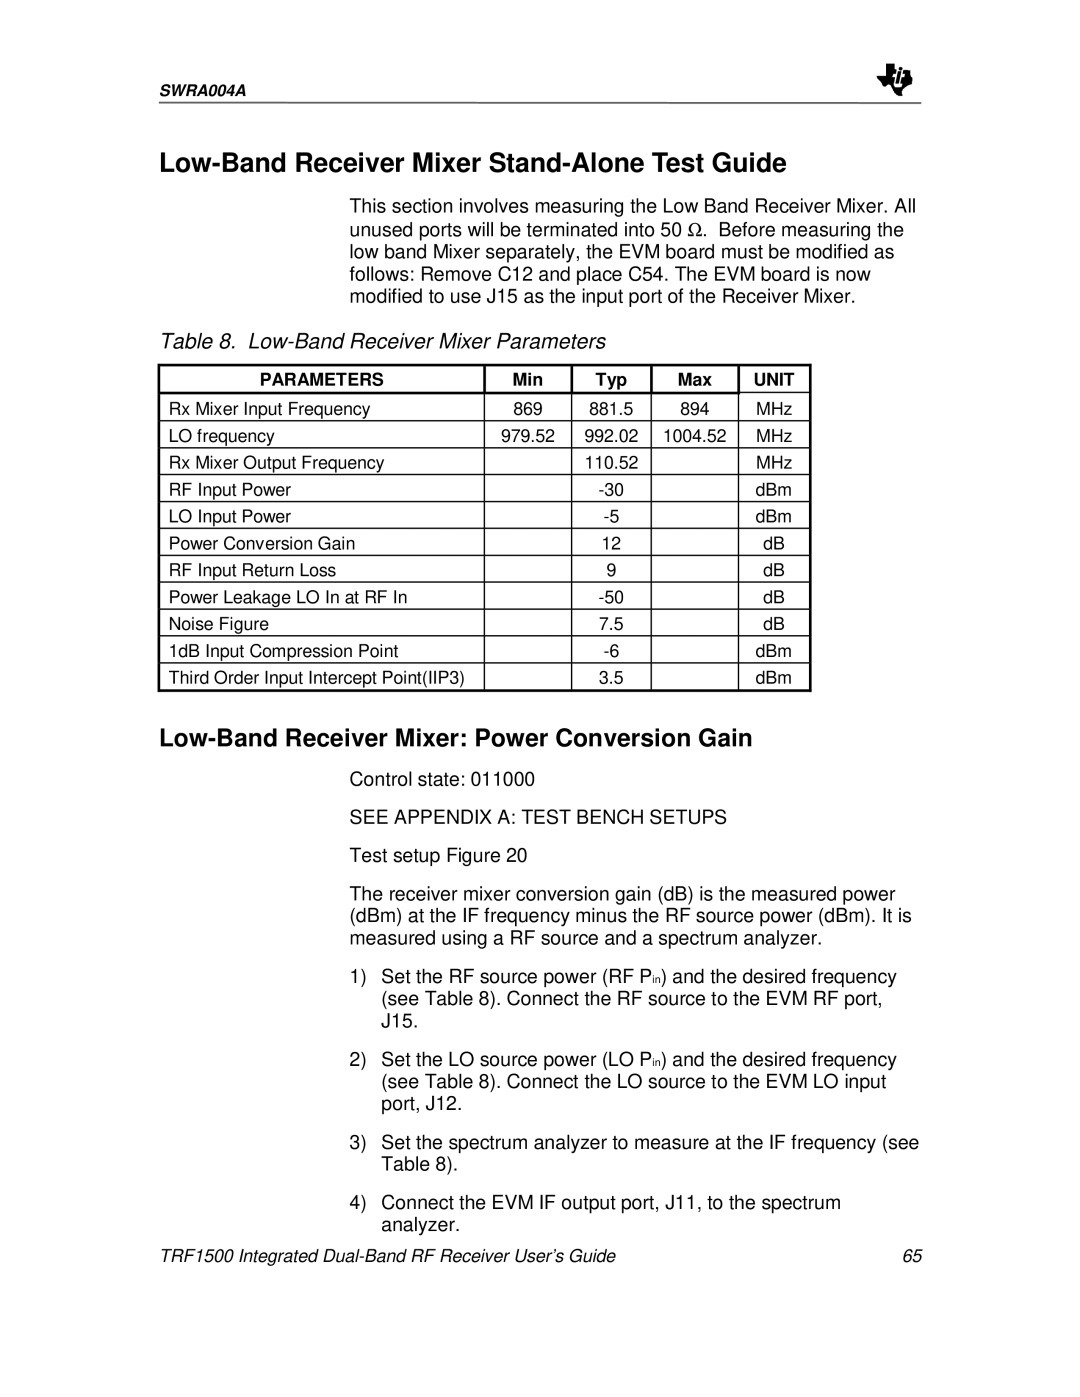 Texas Instruments TRF1500 manual Low-BandReceiver Mixer Stand-AloneTest Guide, Low-BandReceiver Mixer Power Conversion Gain 